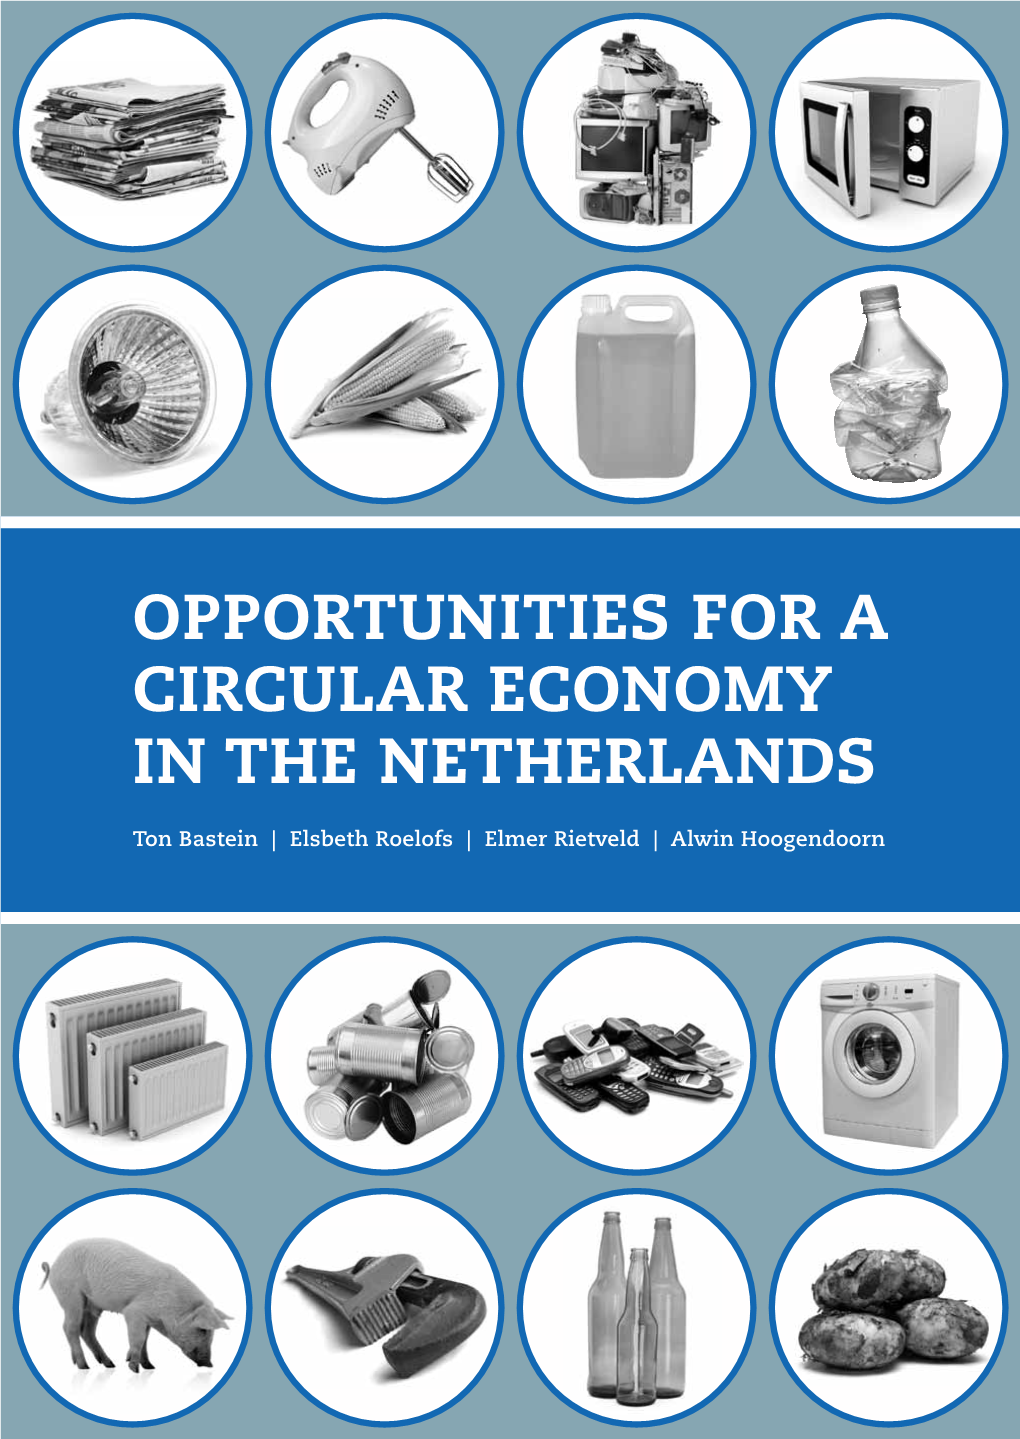 Opportunities for a Circular Economy in the Netherlands